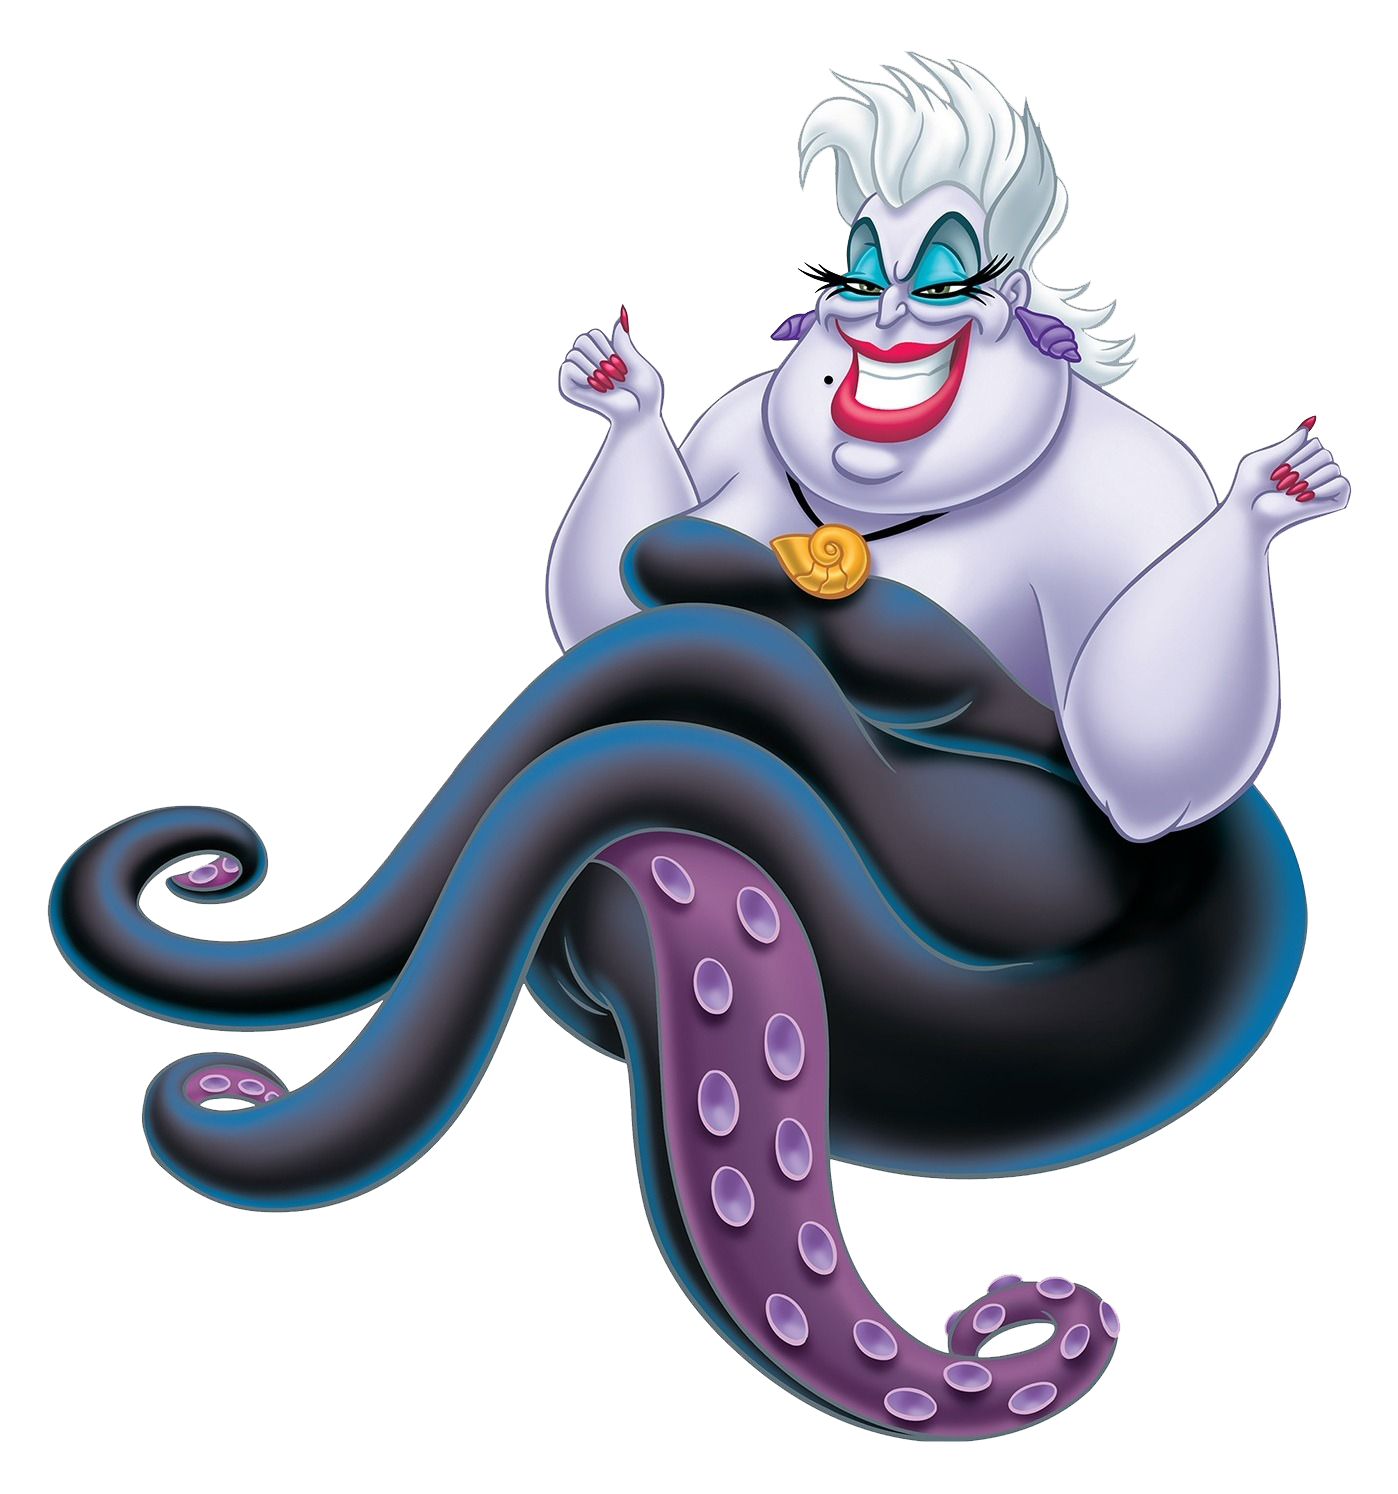 the sister of ursula